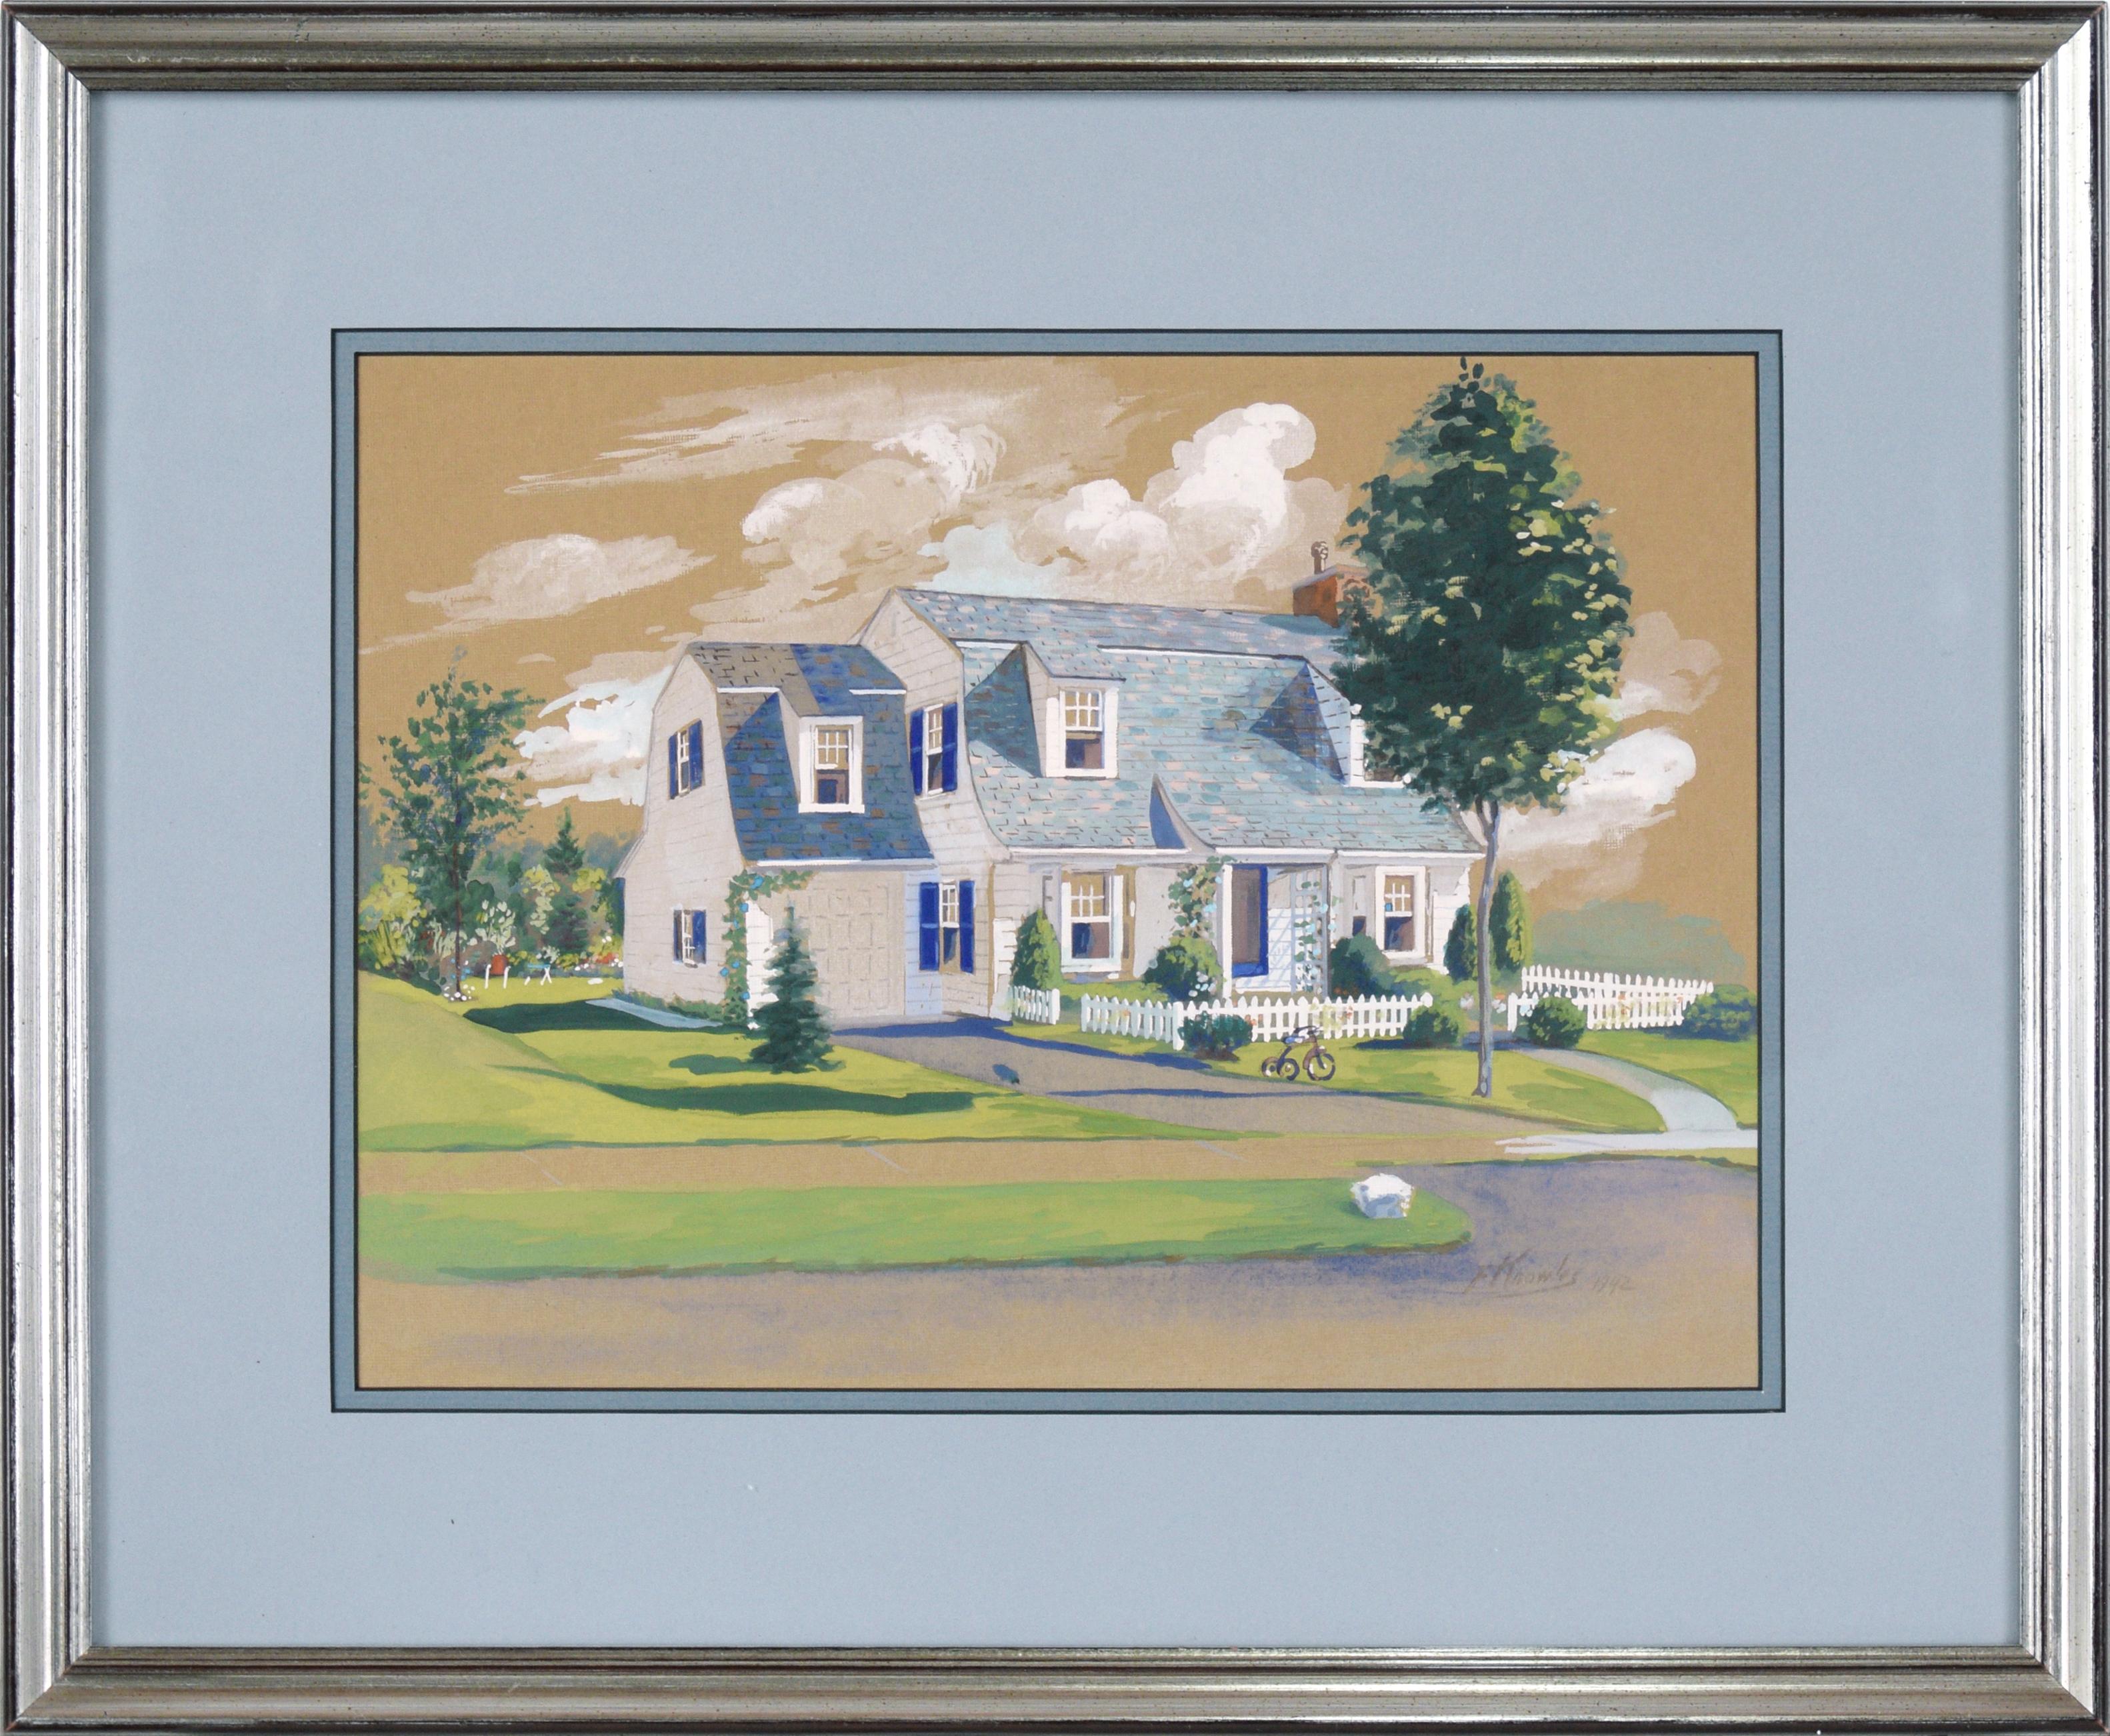 F. Knowles Landscape Art - Architectural Illustration of Cape Cod Style Barn House with Dormers in Gouache 